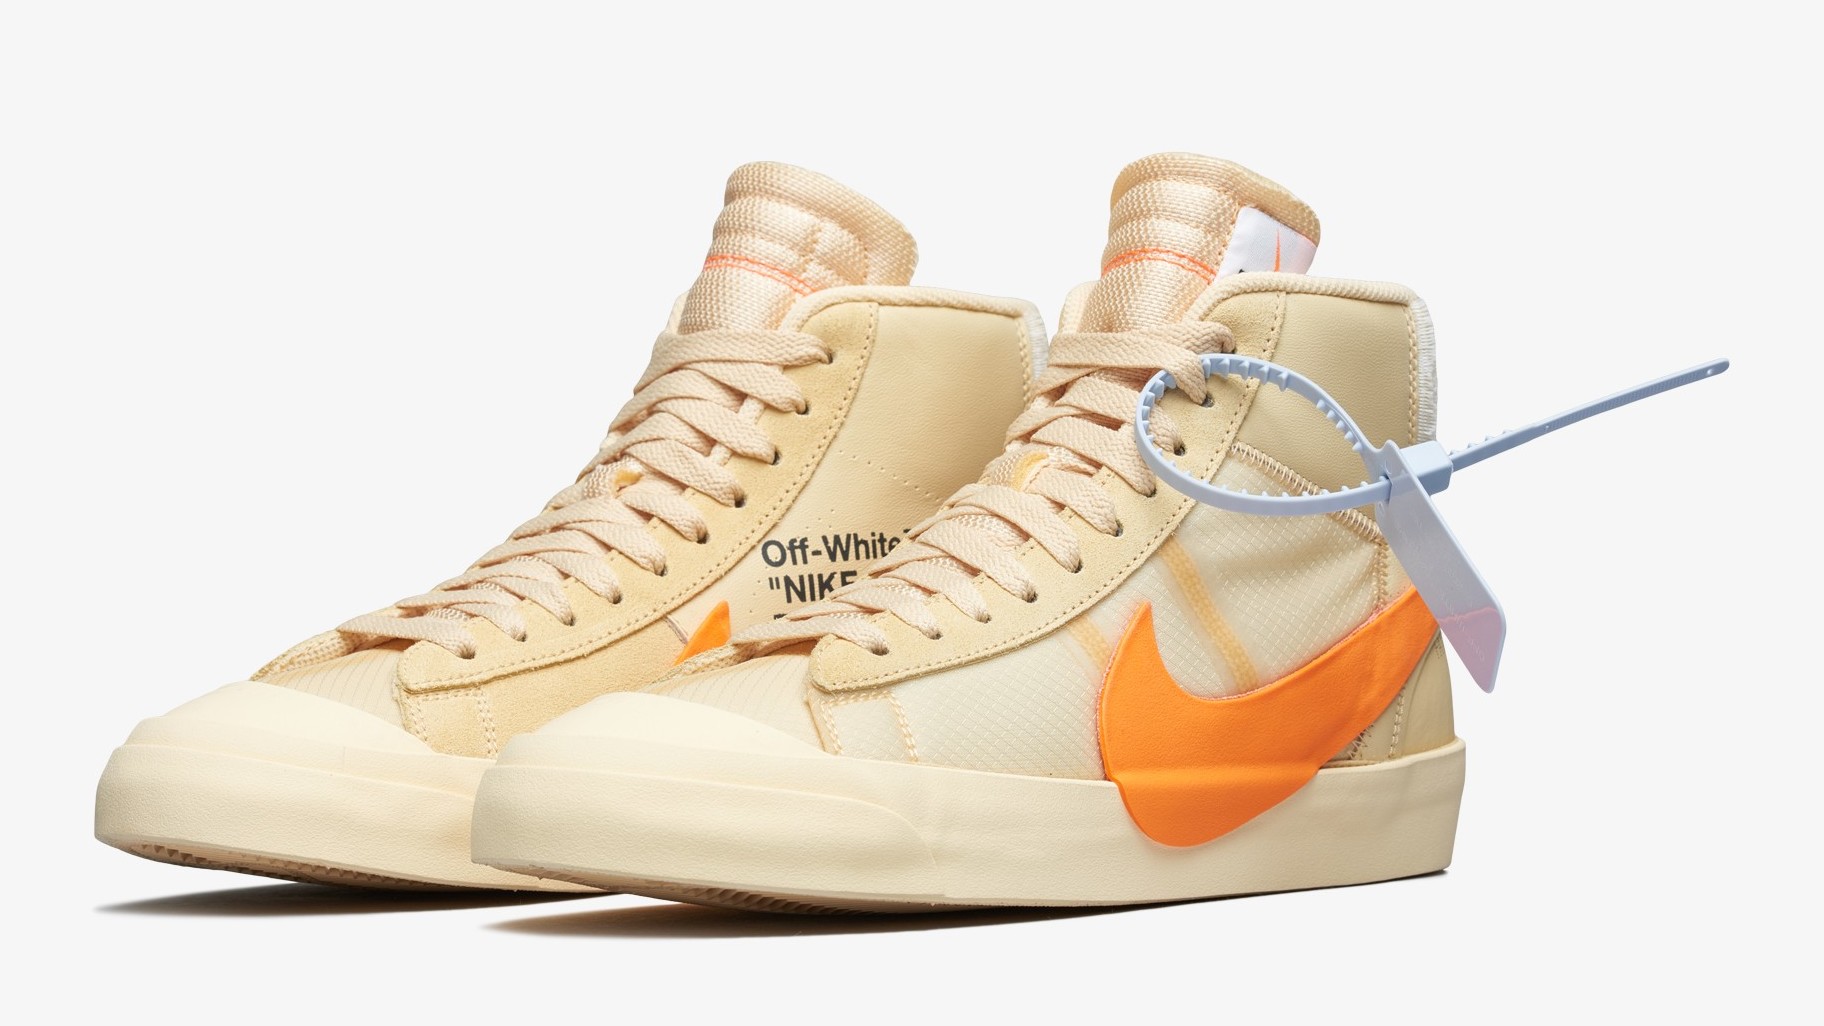 Off-White x Nike Blazer Mid 'All Hallows and 'Grim Reepers' Date Sole Collector